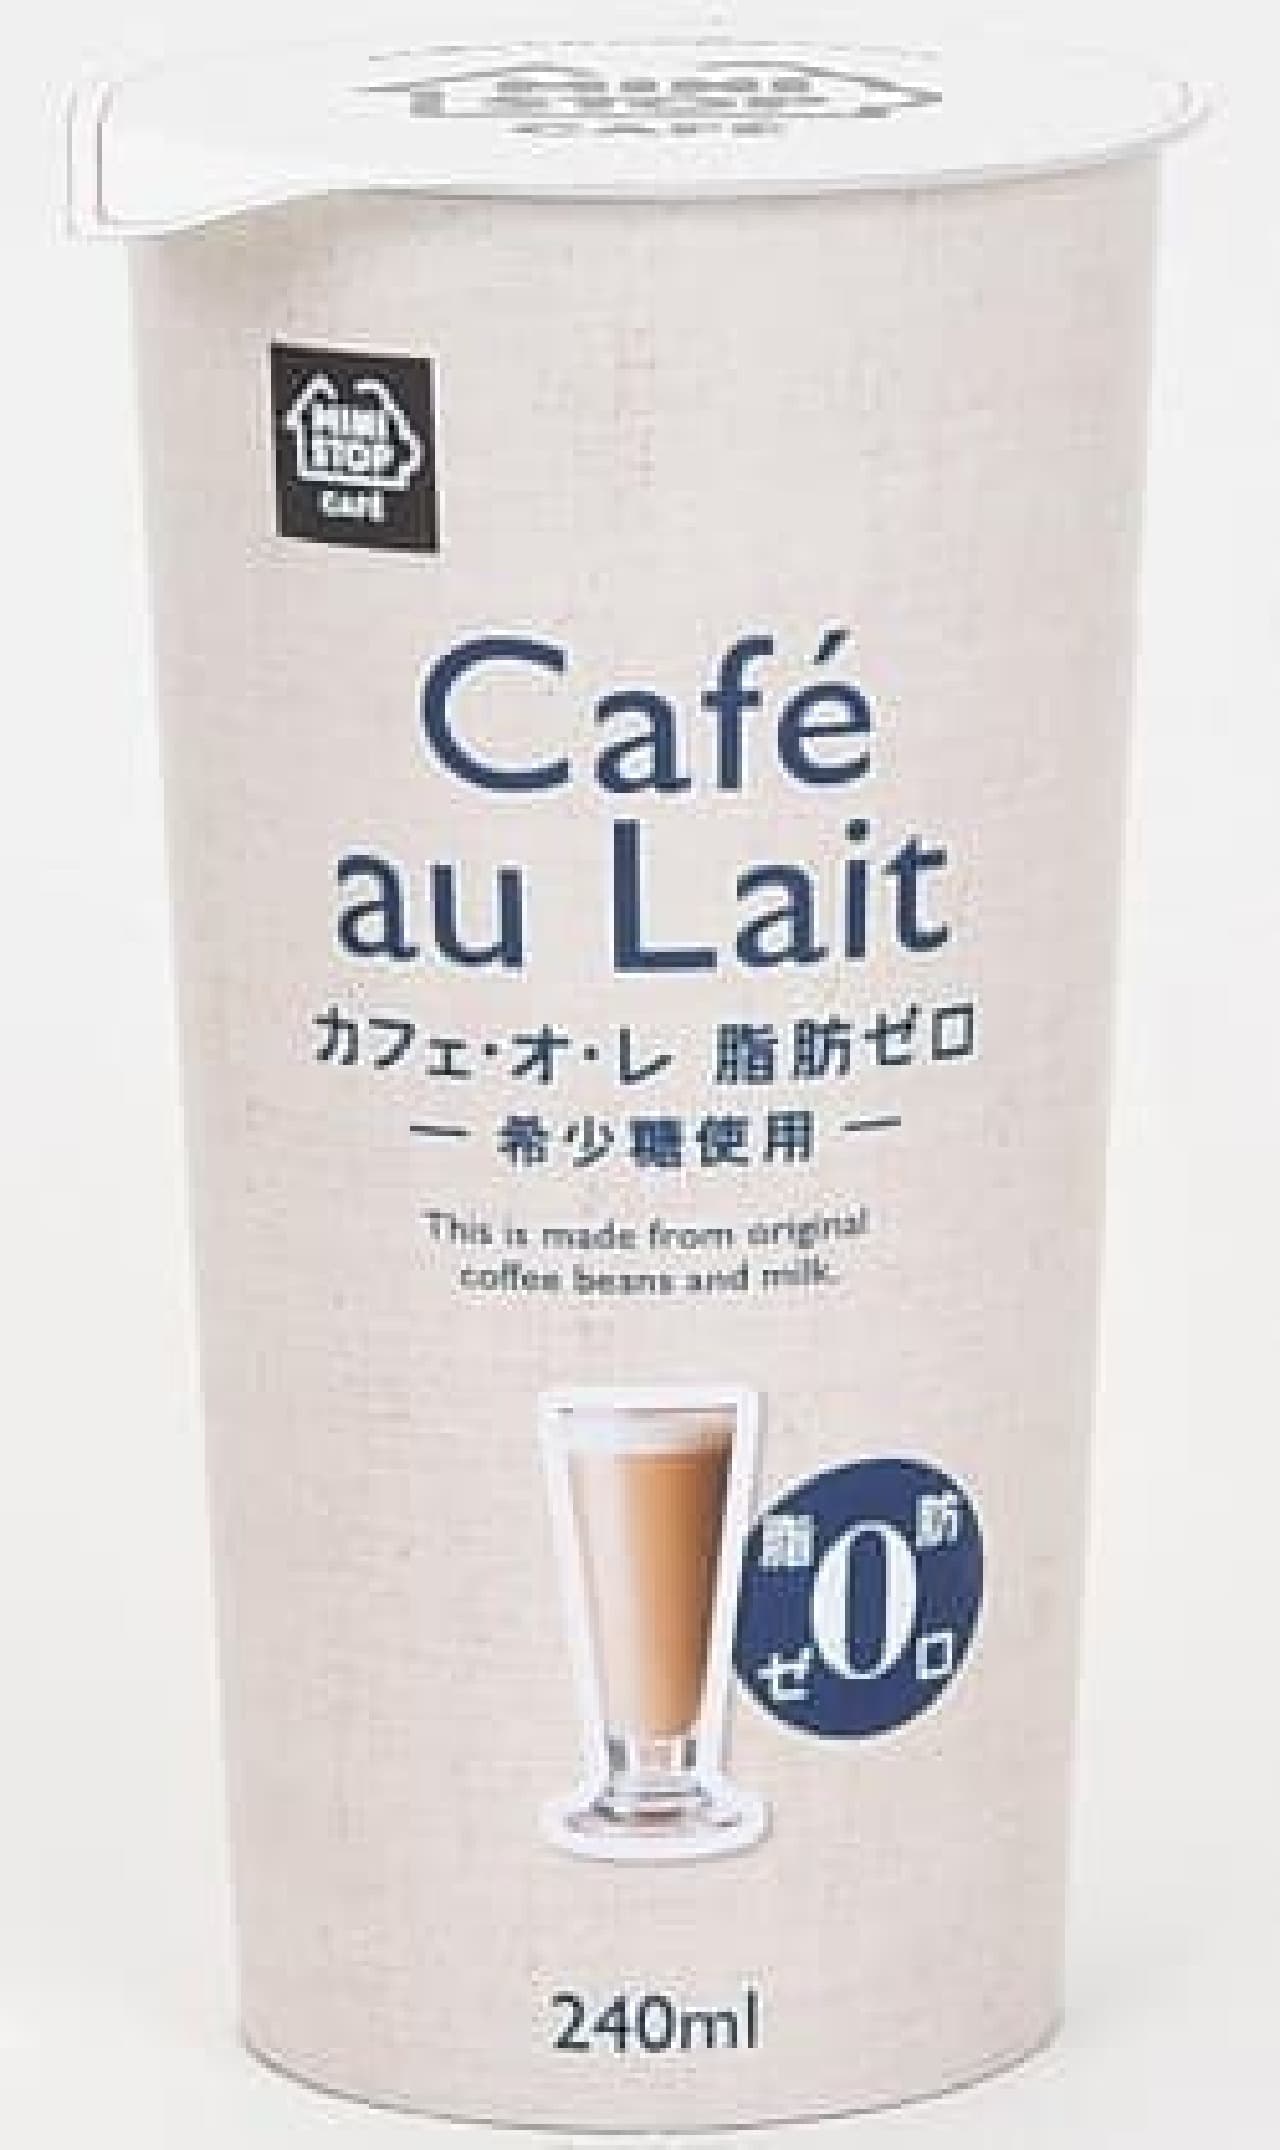 For those who want to drink cafe au lait but are concerned about calories